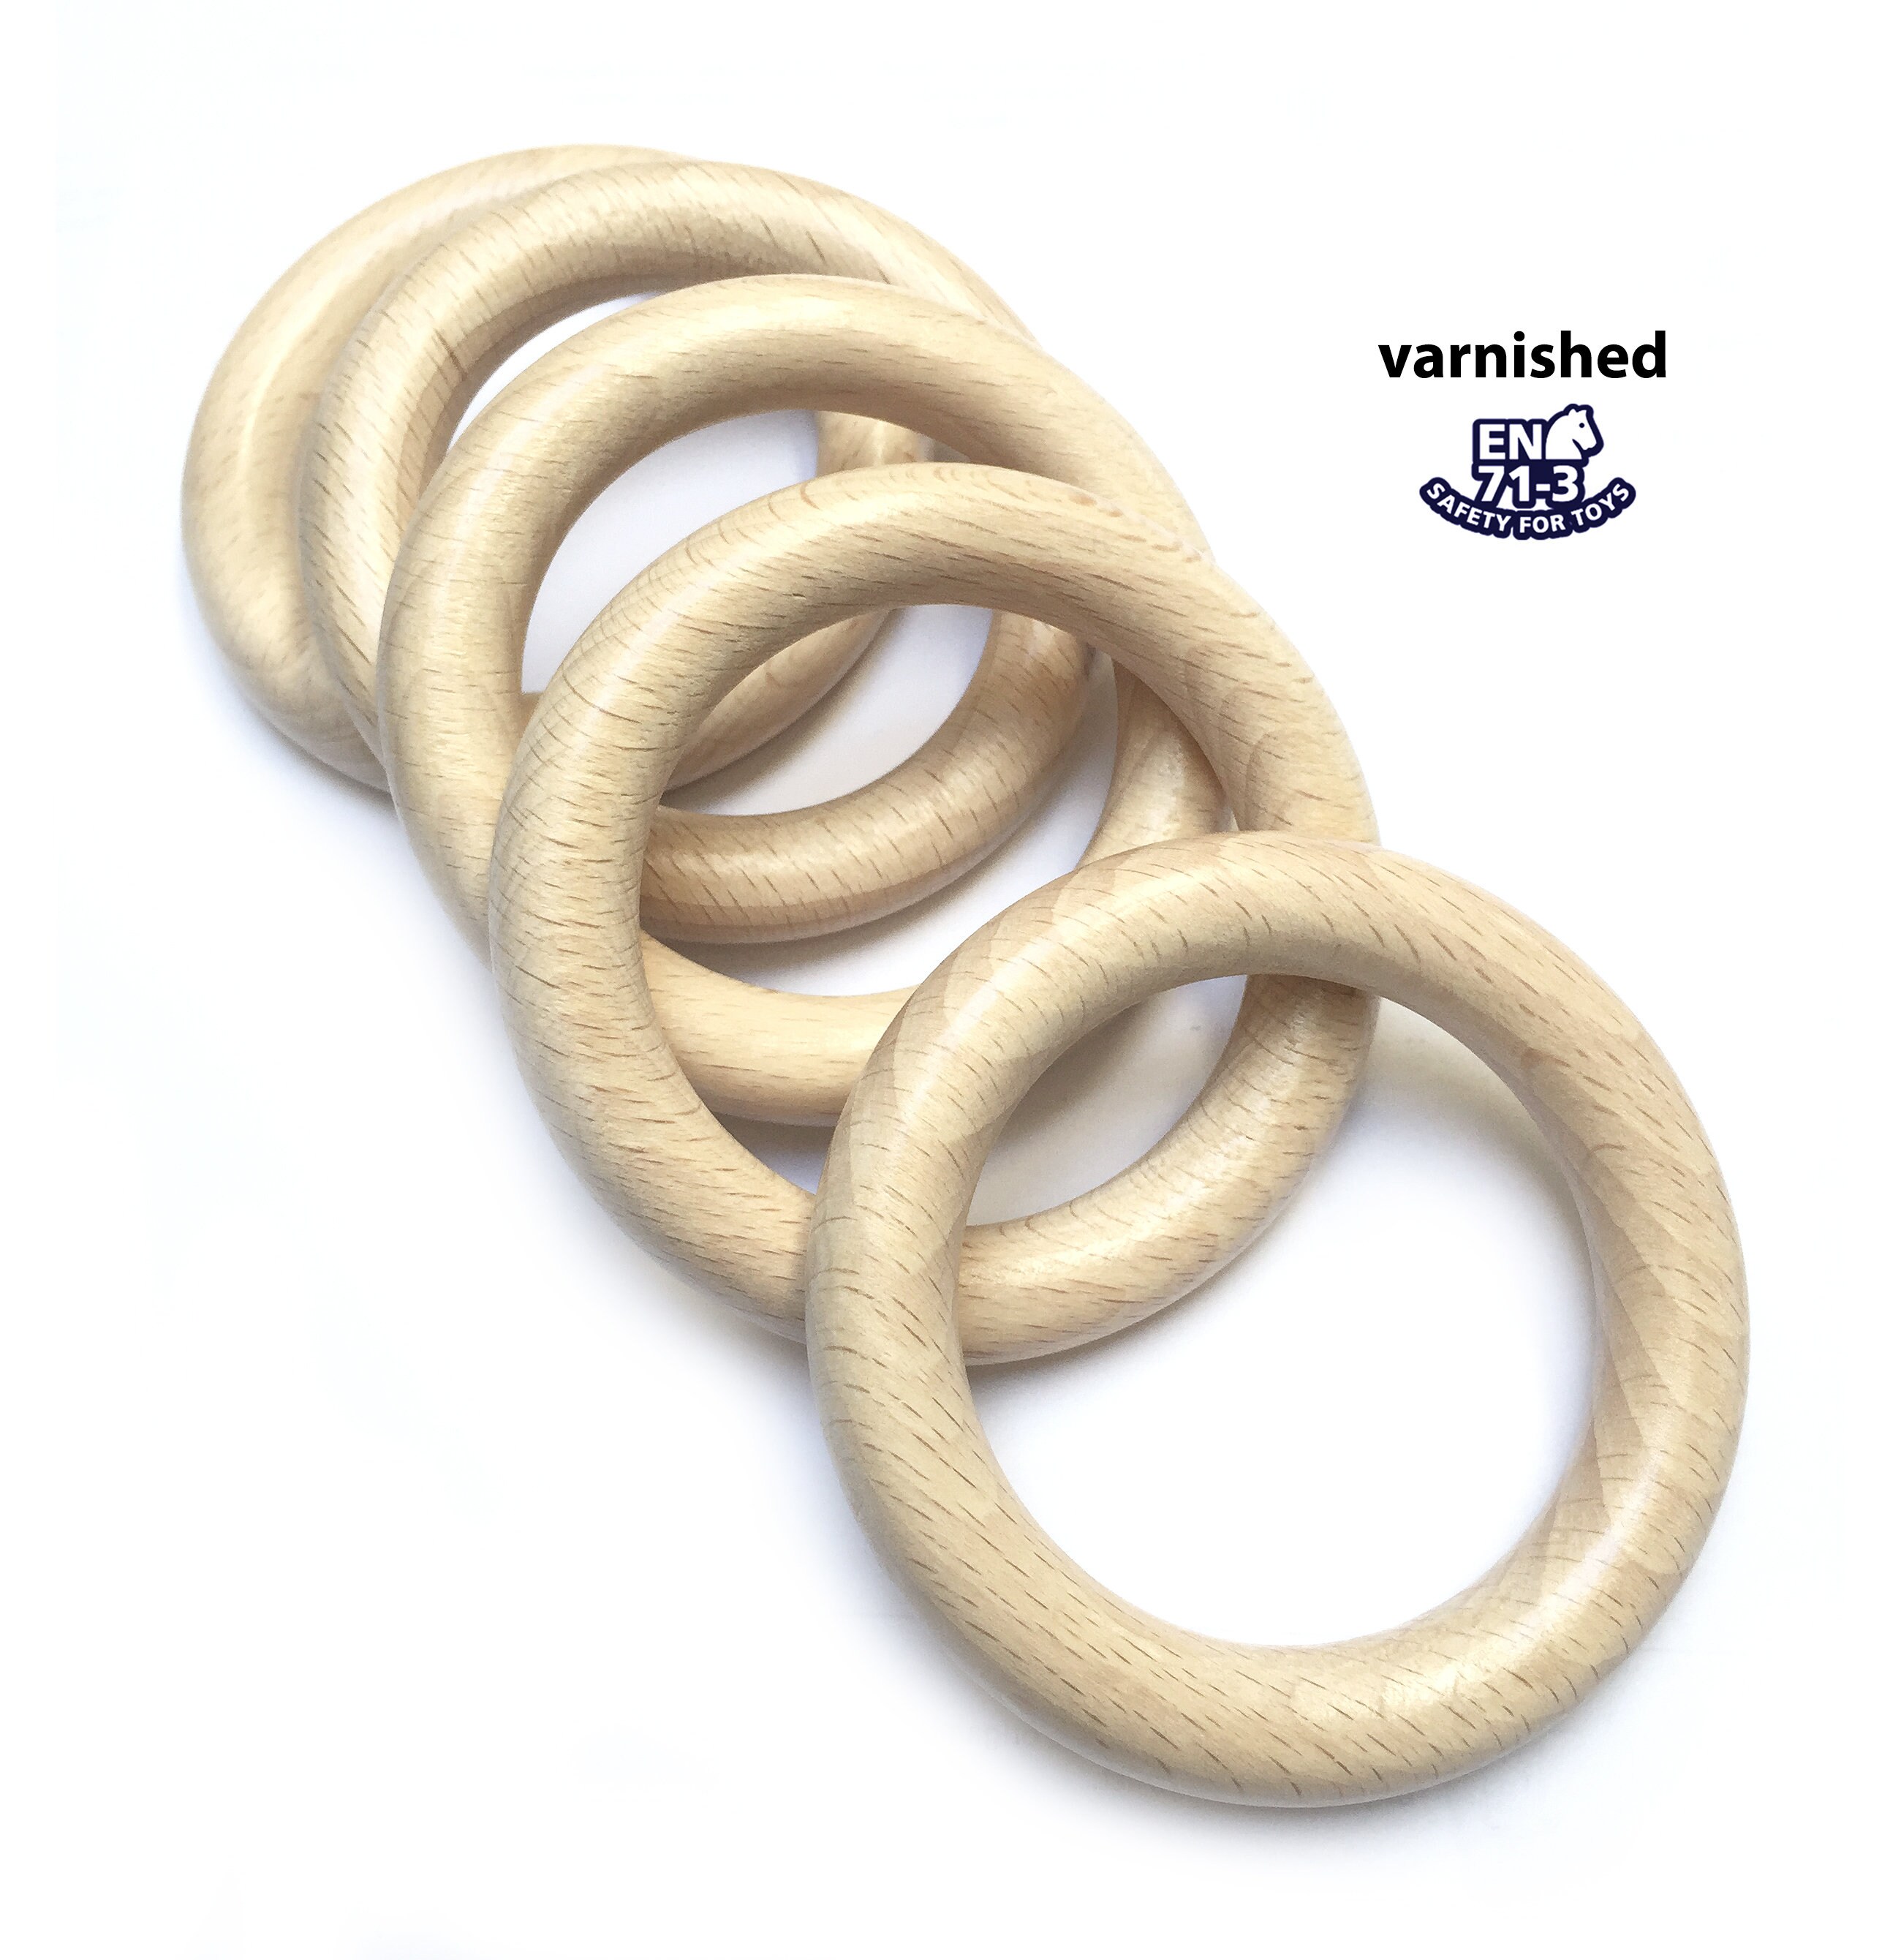 Natural Wood Ring Crafts (pack Of 50) Different Sizes (70mm, 65mm, 50mm,  40mm, 30mm) Untreated Wood Ring Crafts, Lace Accessories Crafts, Decoration